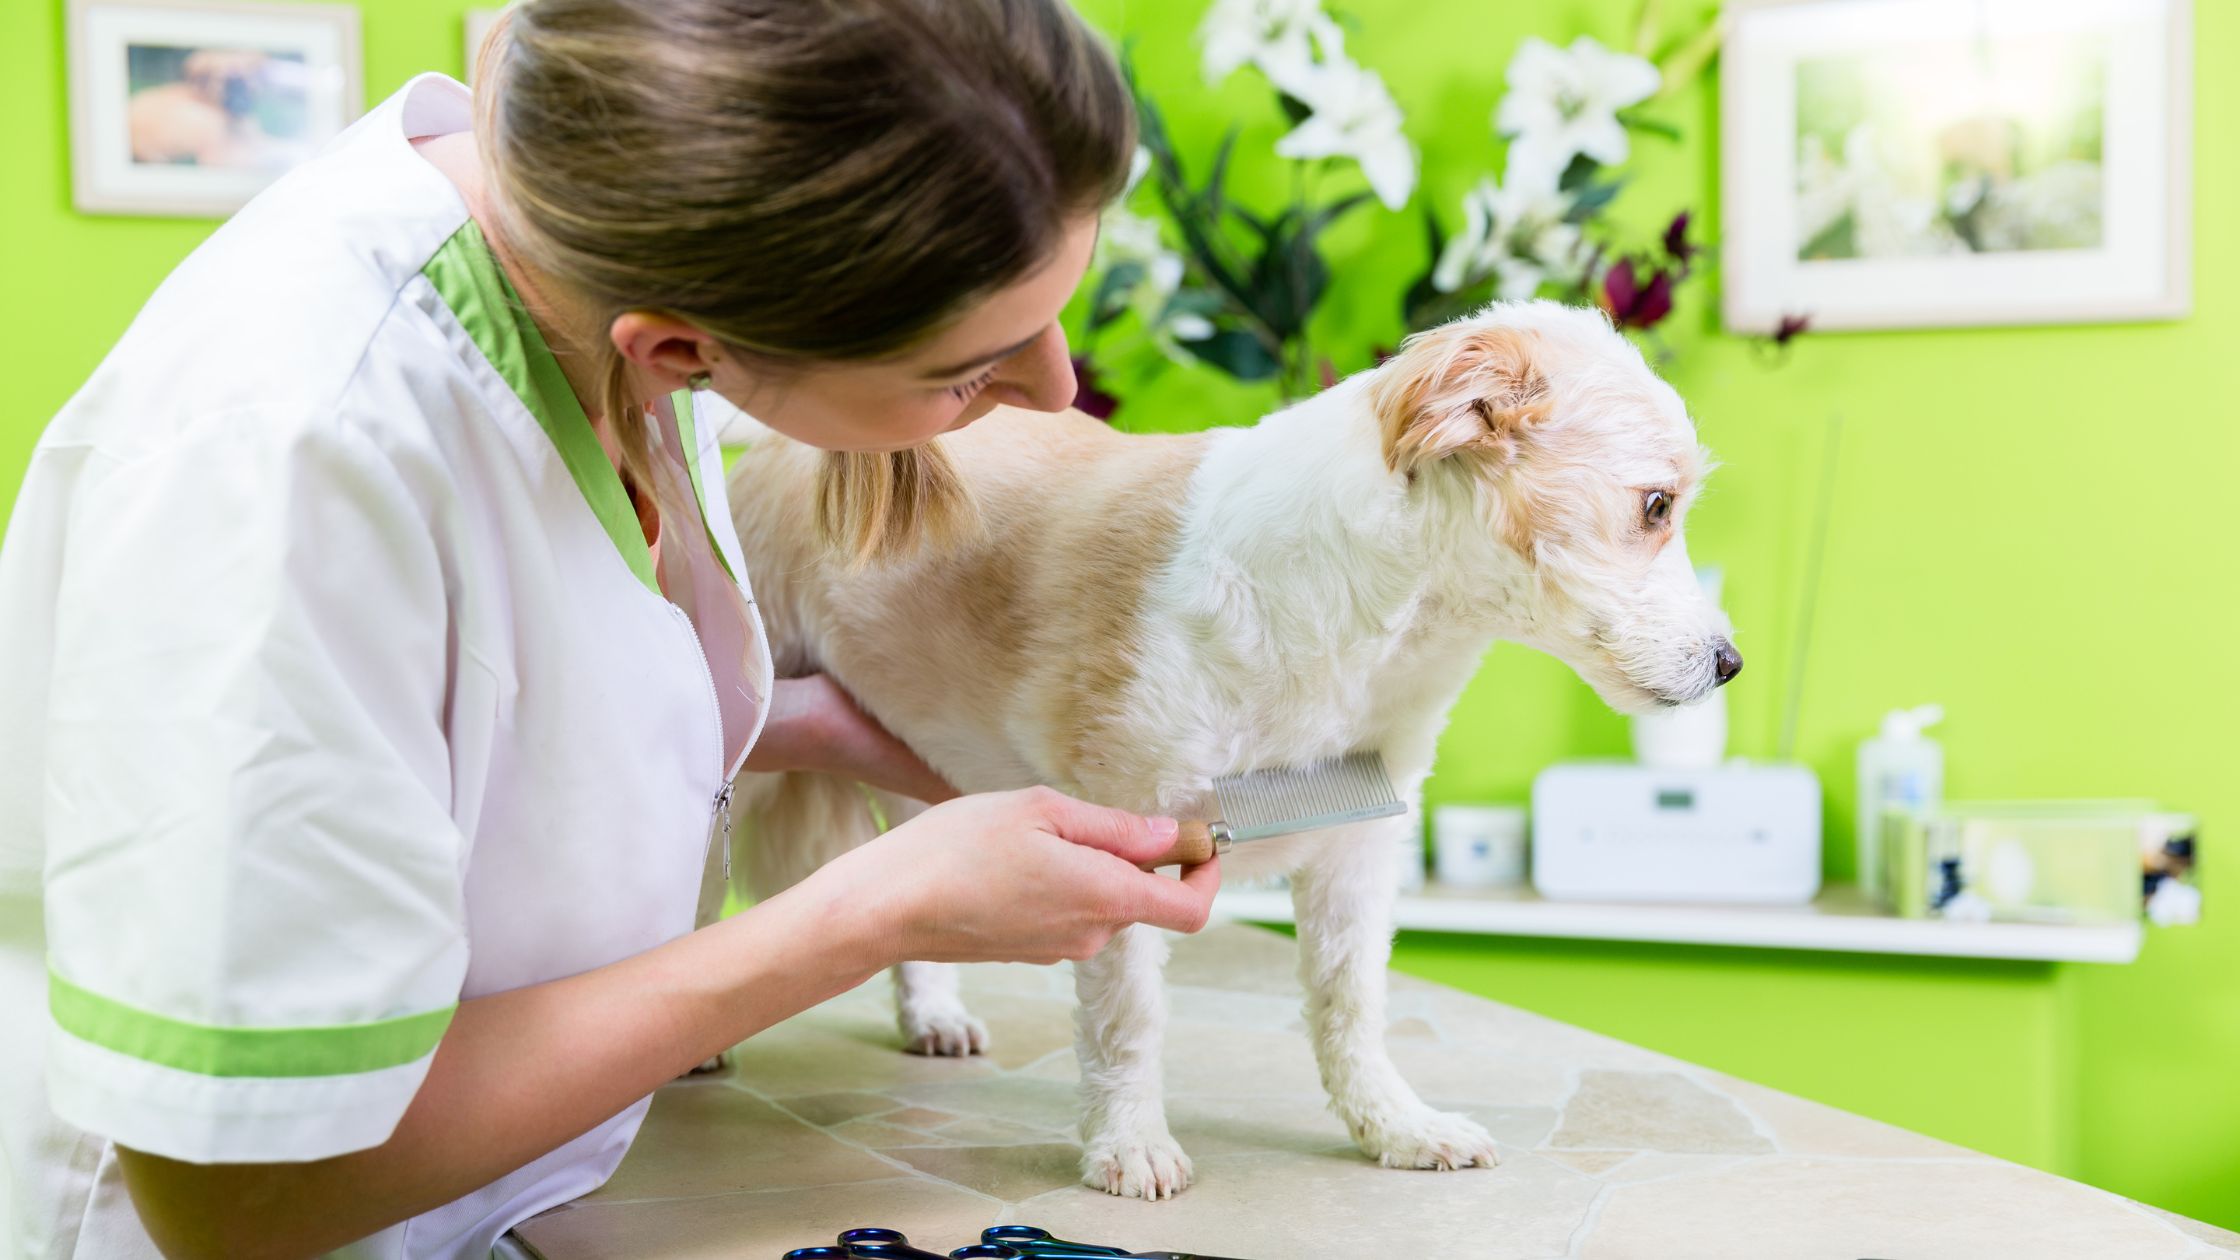 is dog grooming stressful for dogs